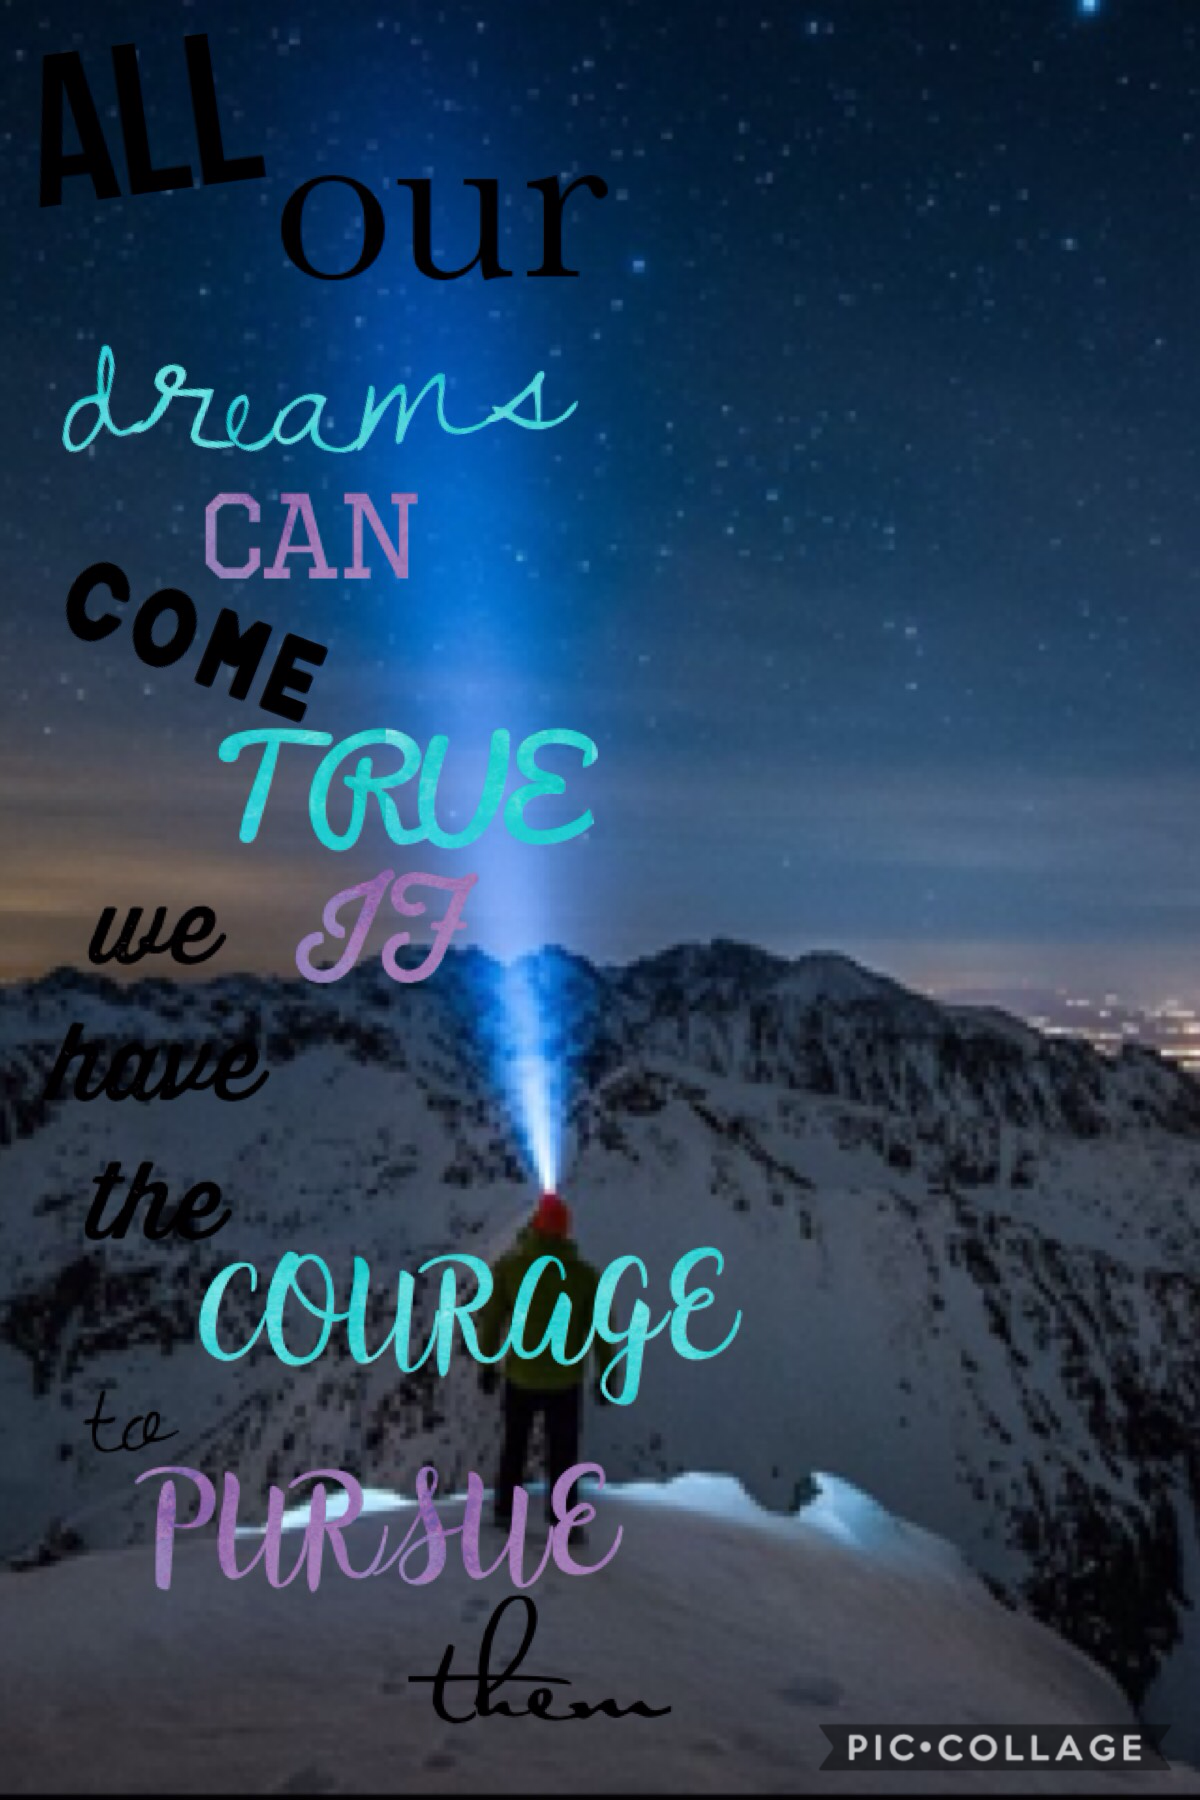 Sorry, the writing is a little bit hard to read. 



Here's what the quote actually says: 

"All our dreams can come true if we have the courage to pursue them."